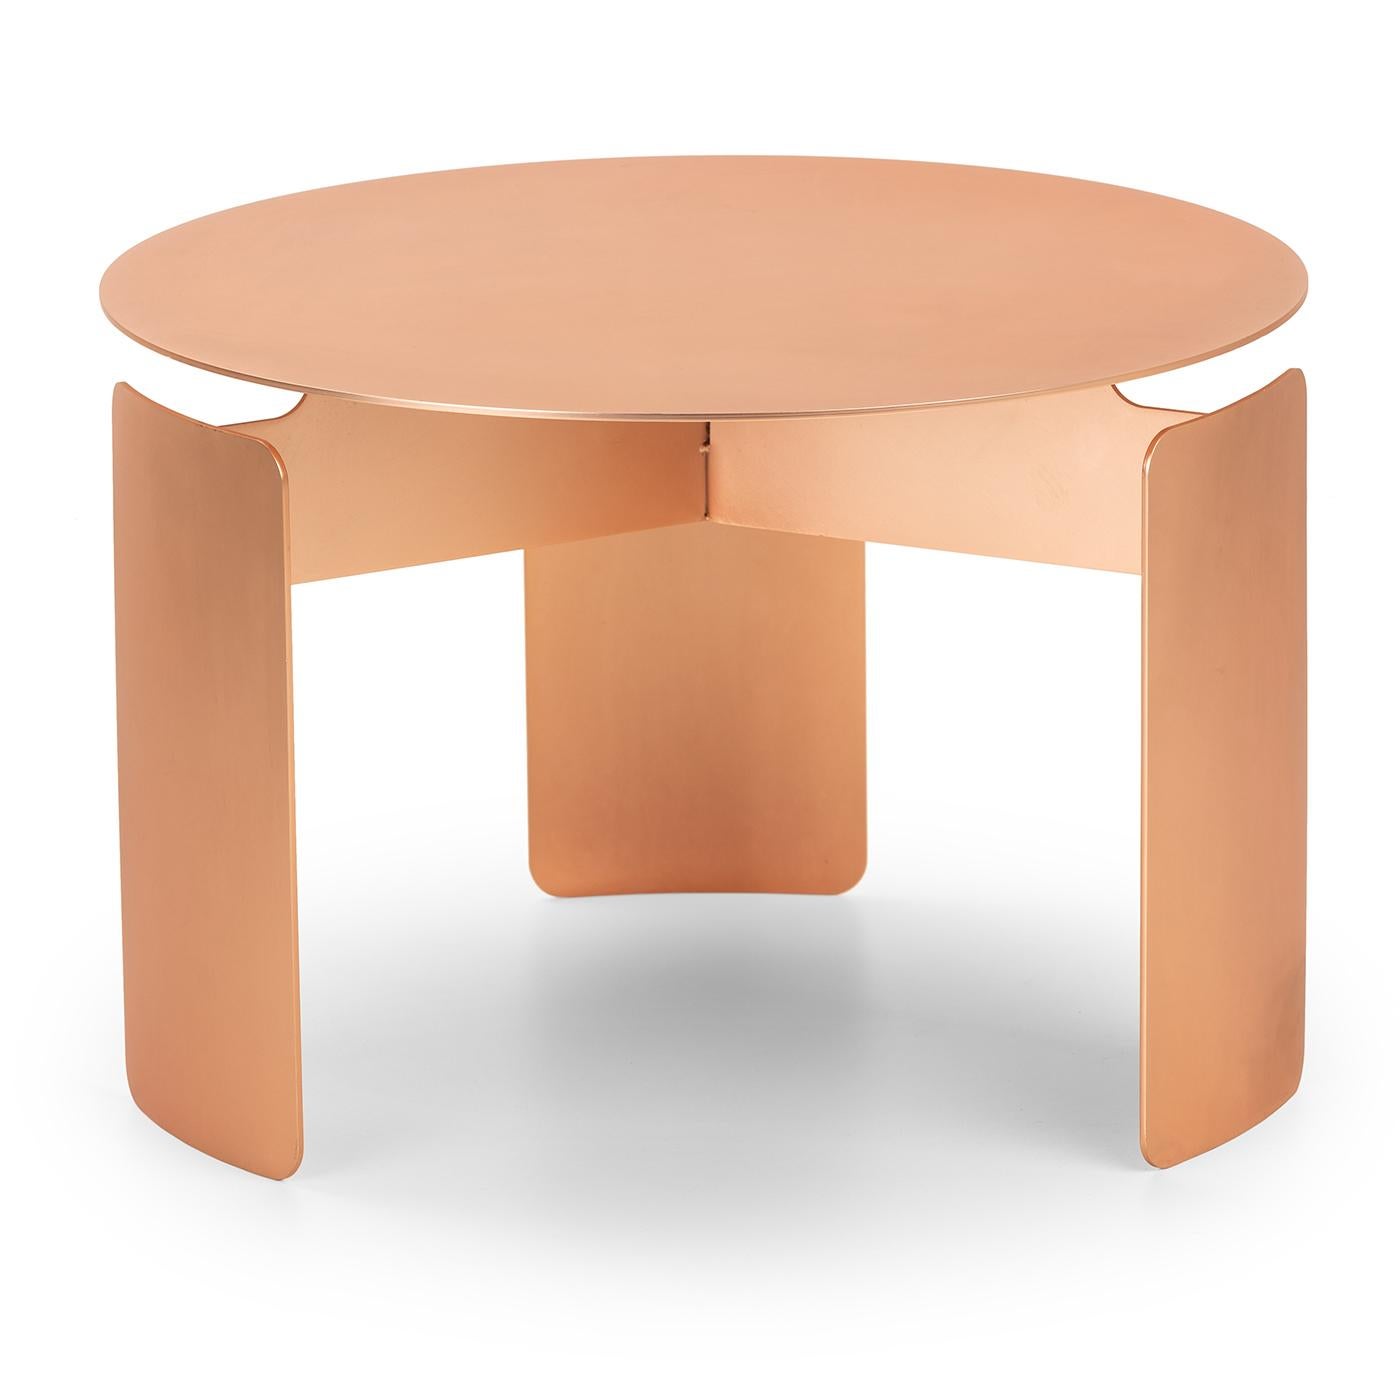 The unexpected perspectives of this Avant Garde, contemporary coffee table by Finnish designer Elisa Honaken are perfectly rendered by Mingardo's masterful hands. The iron structure has a satin powder pink finish that enhances the soft curves of the